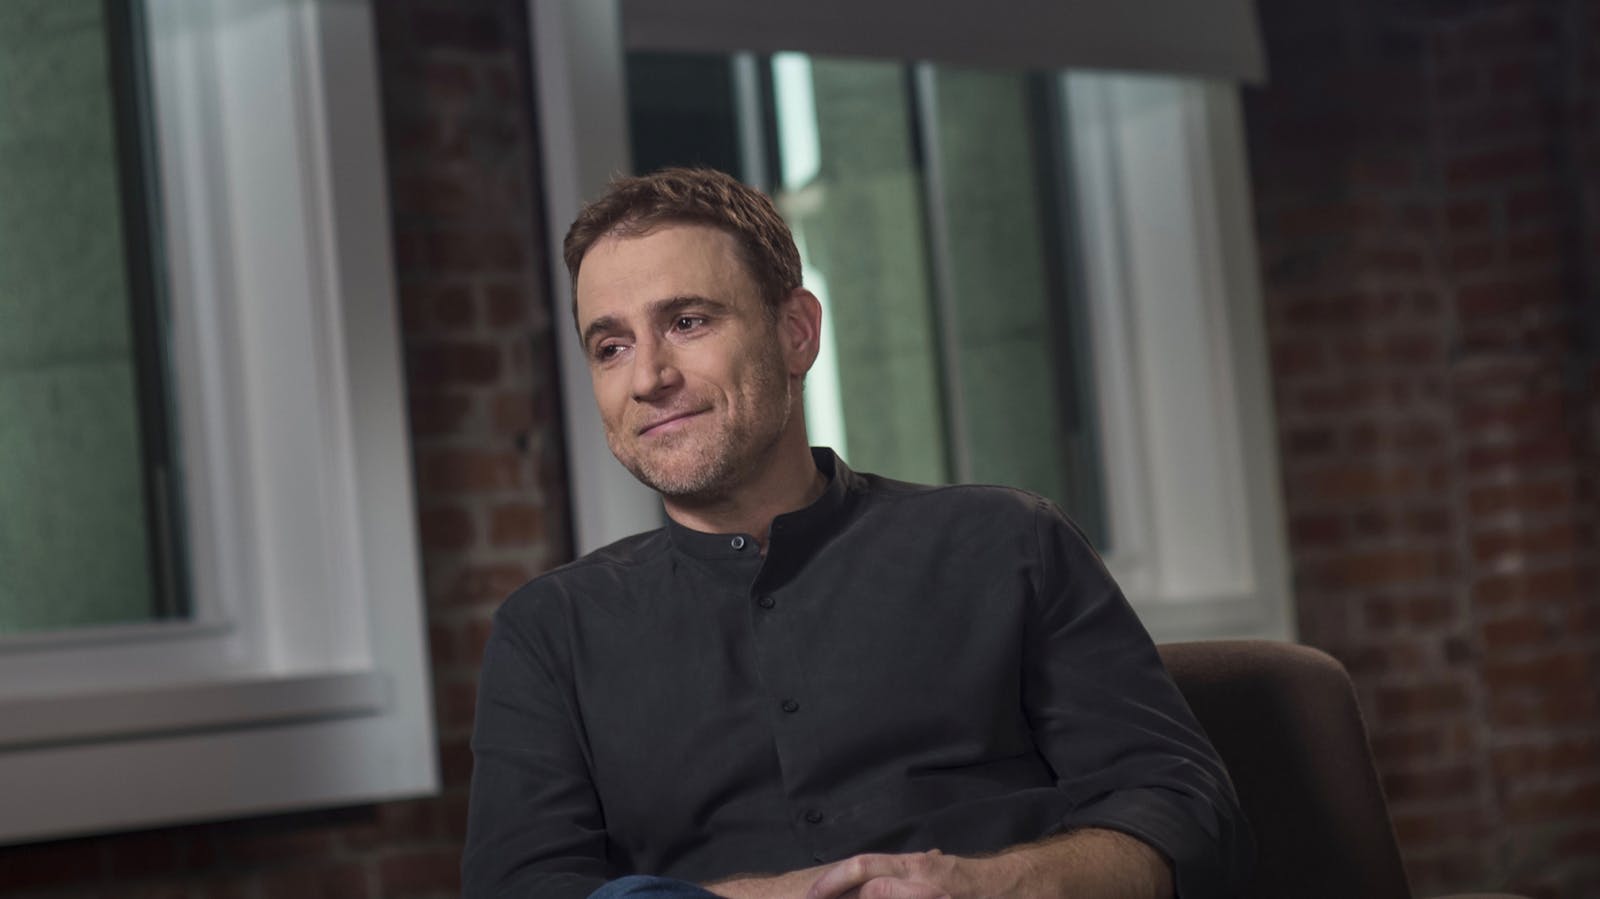 Slack CEO and co-founder Stewart Butterfield. Photo by Bloomberg